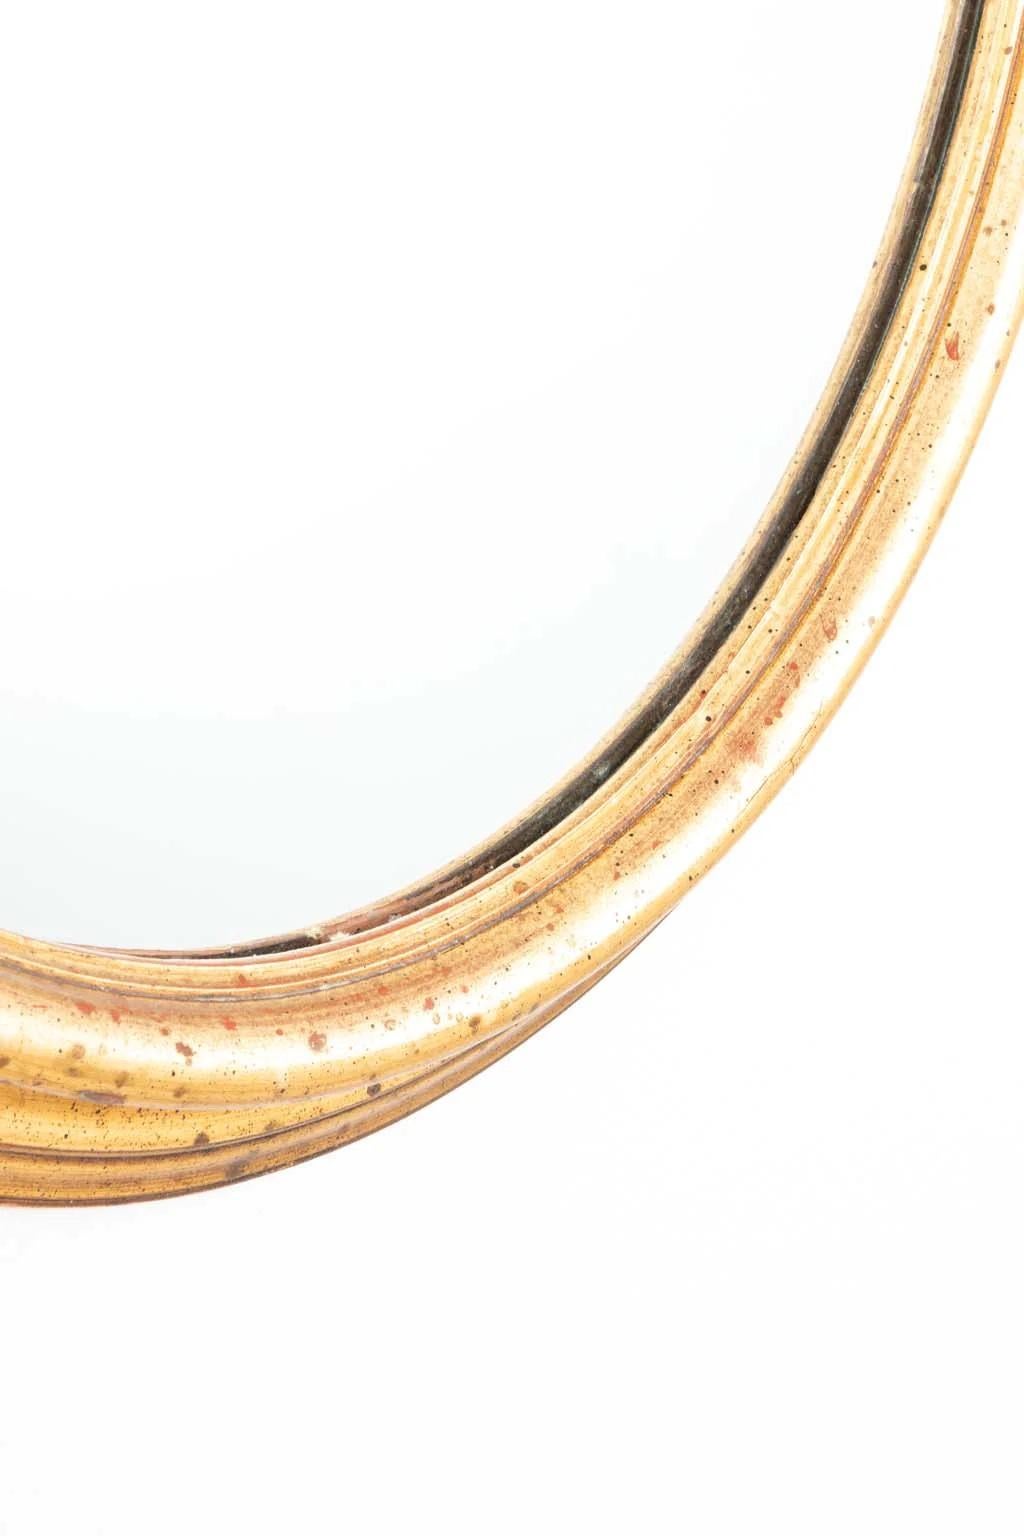 Italian Gilt Wood Mirror In Good Condition For Sale In New York, NY